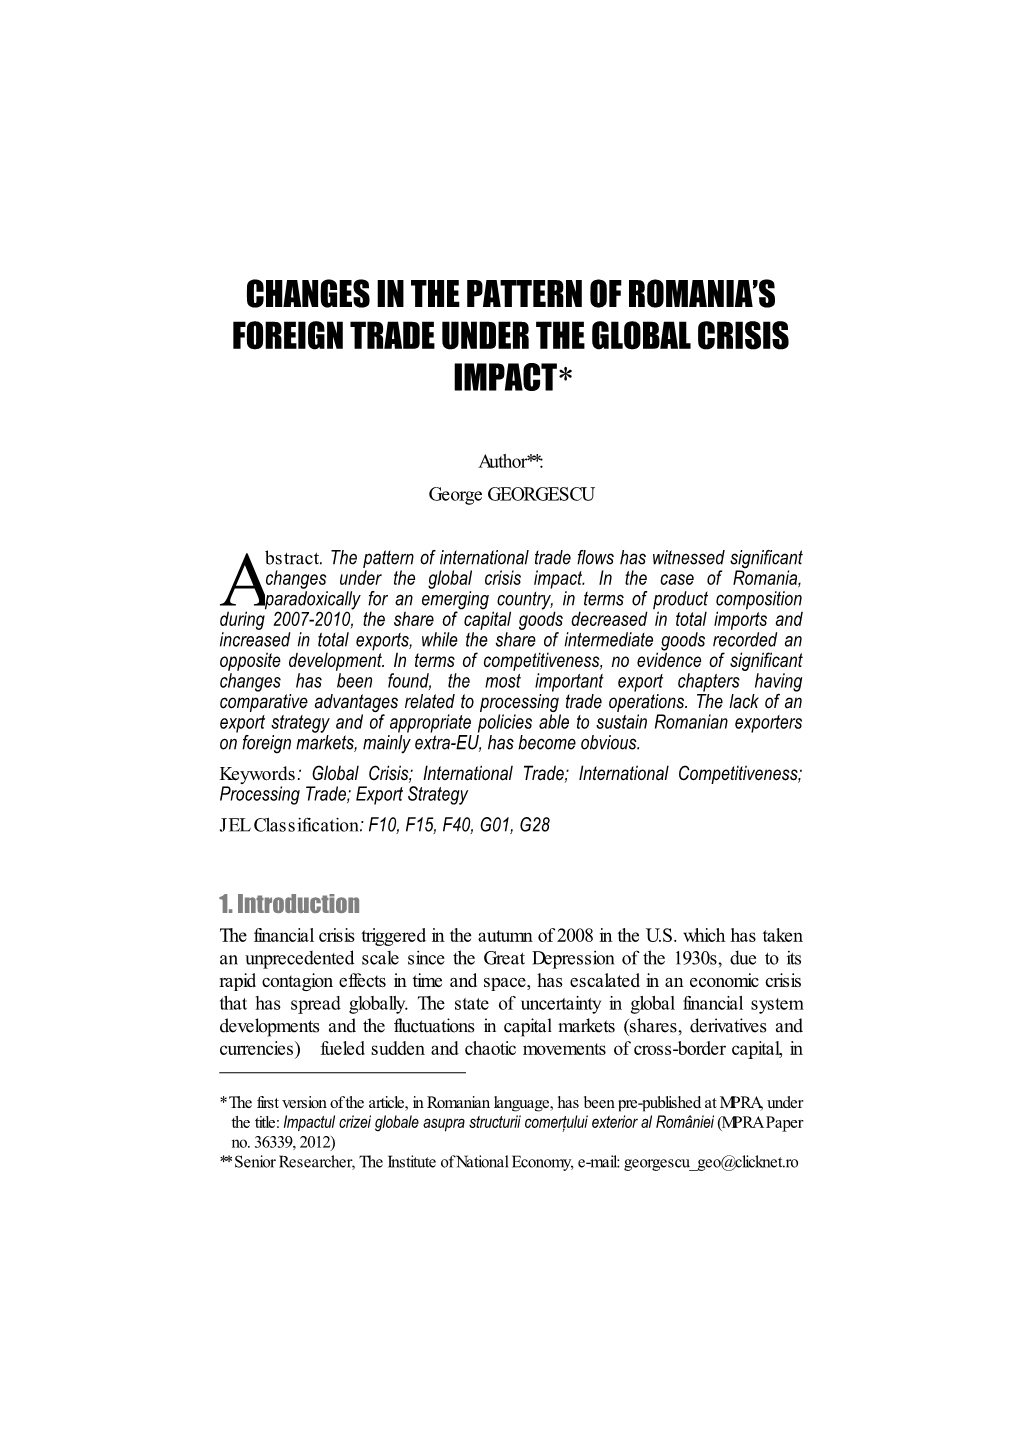 Changes in the Pattern of Romania’S Foreign Trade Under the Global Crisis Impact*